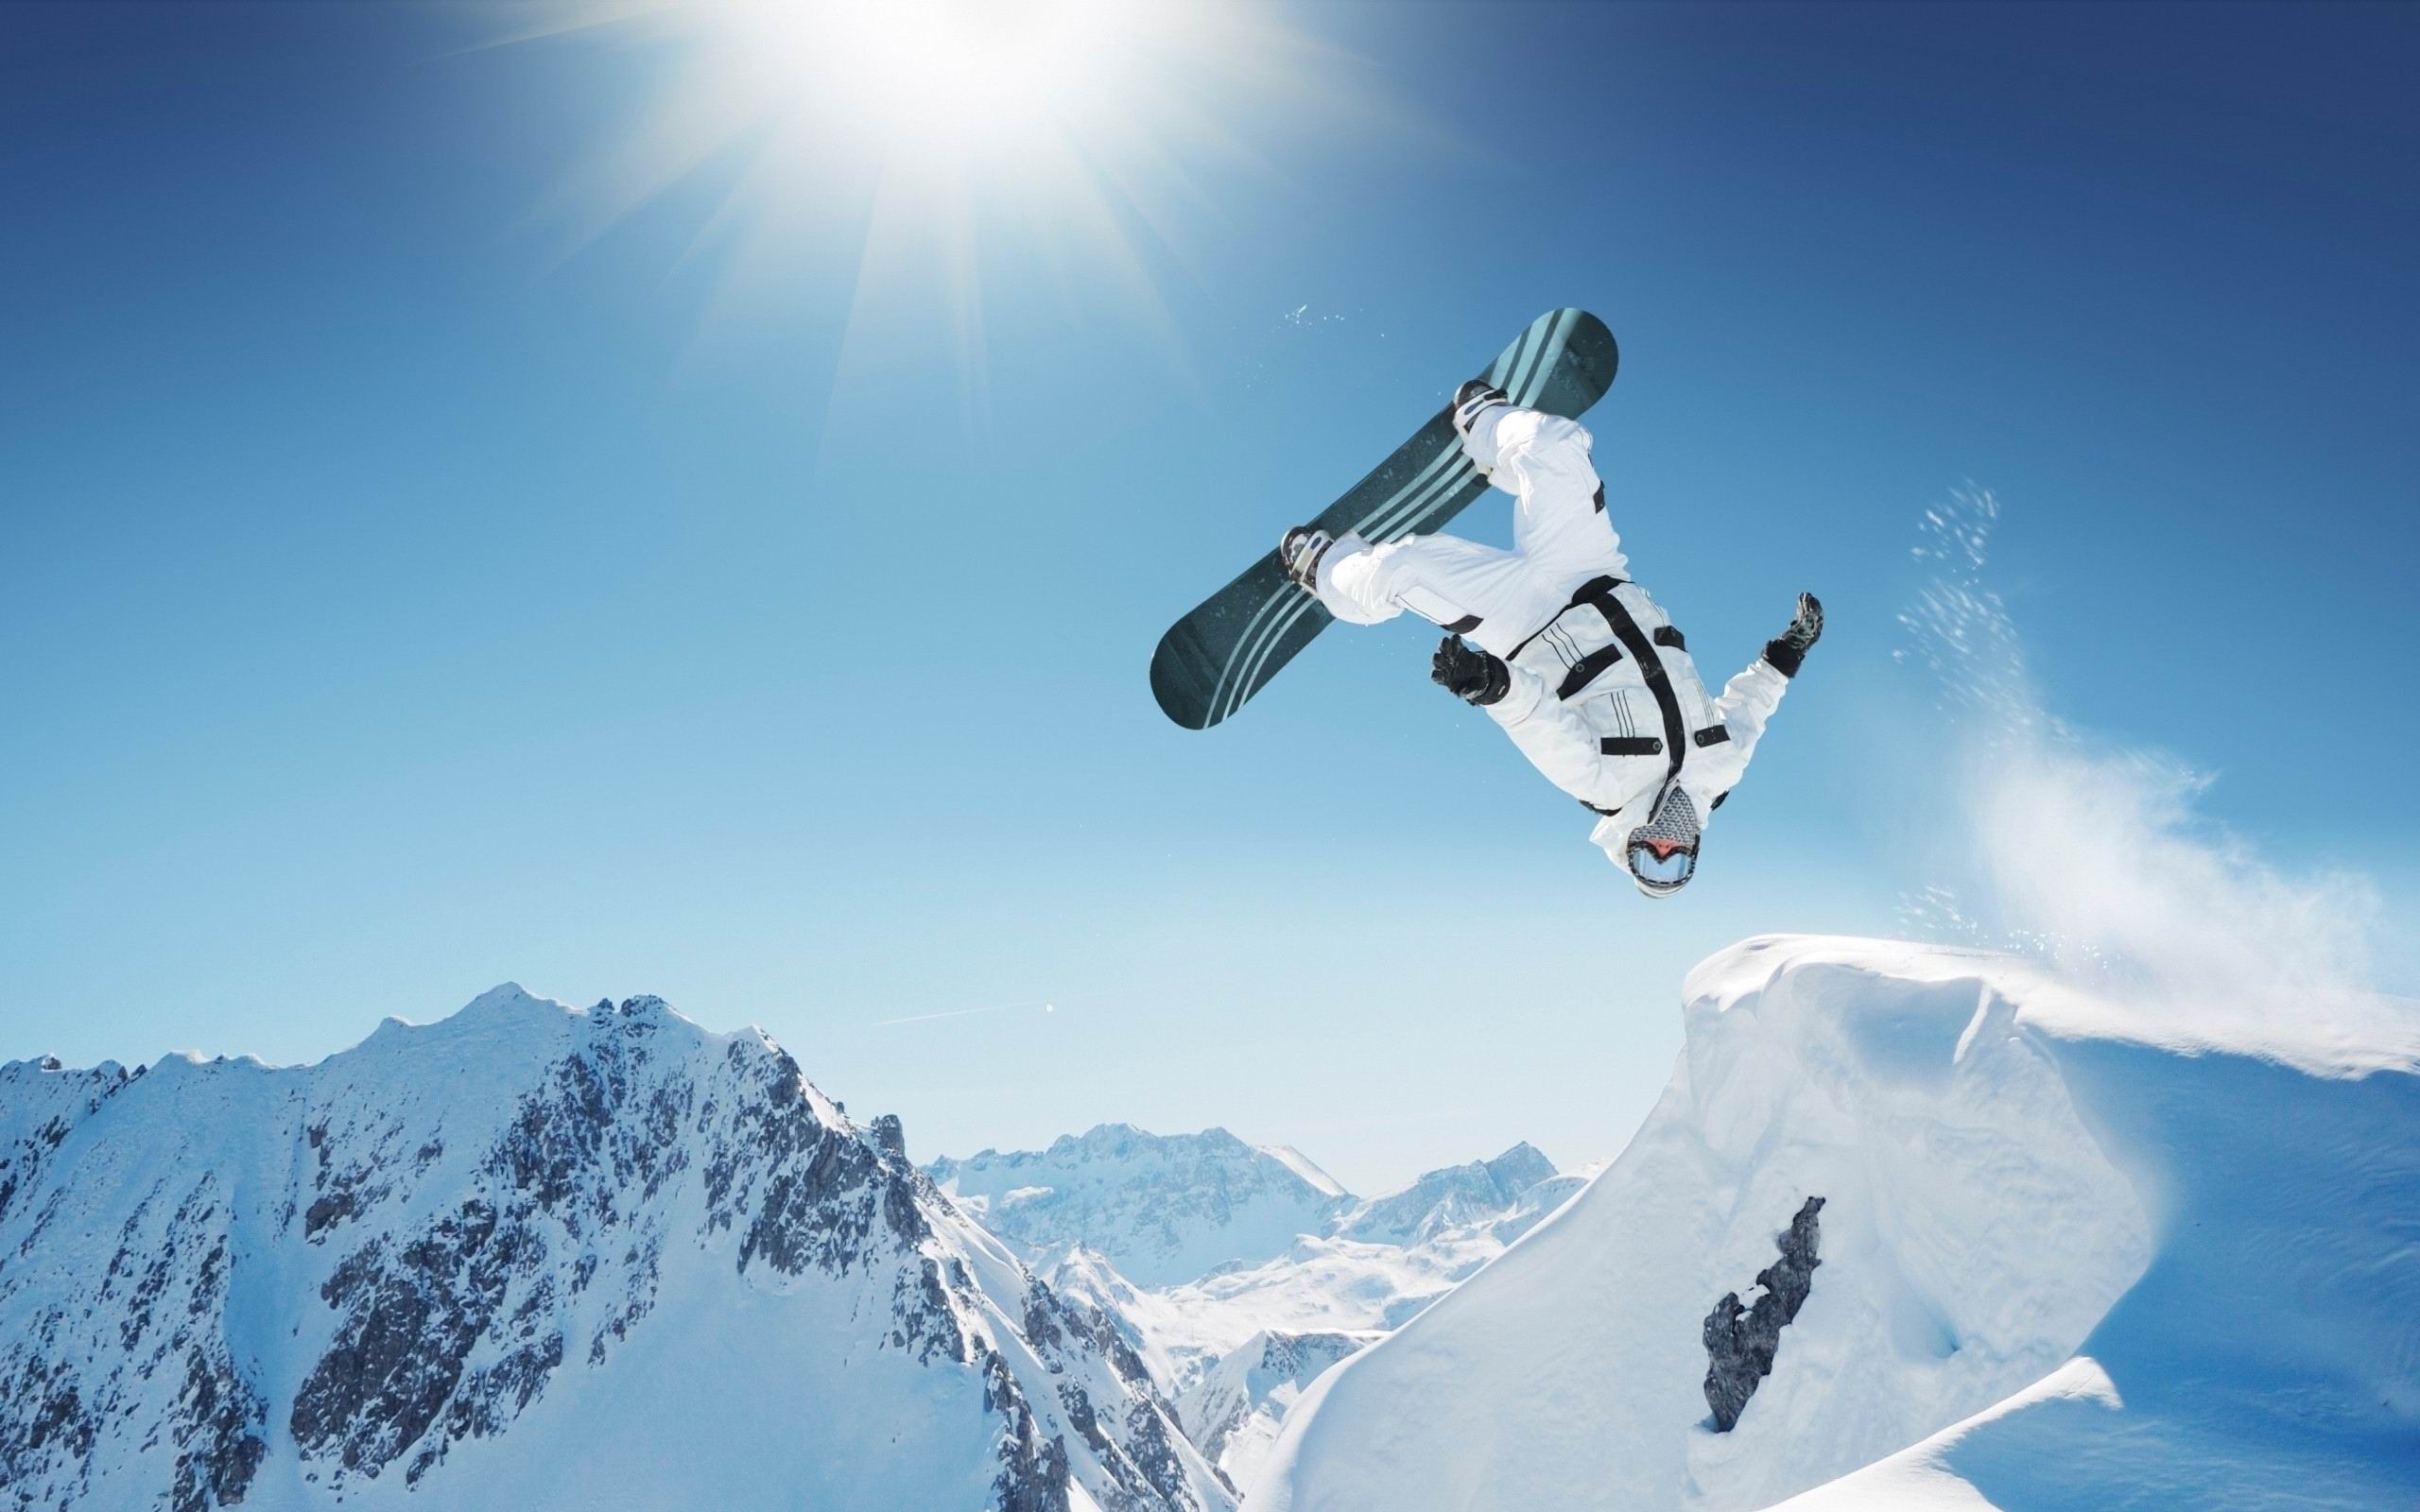 Skiing Wallpaper High Definition Quality